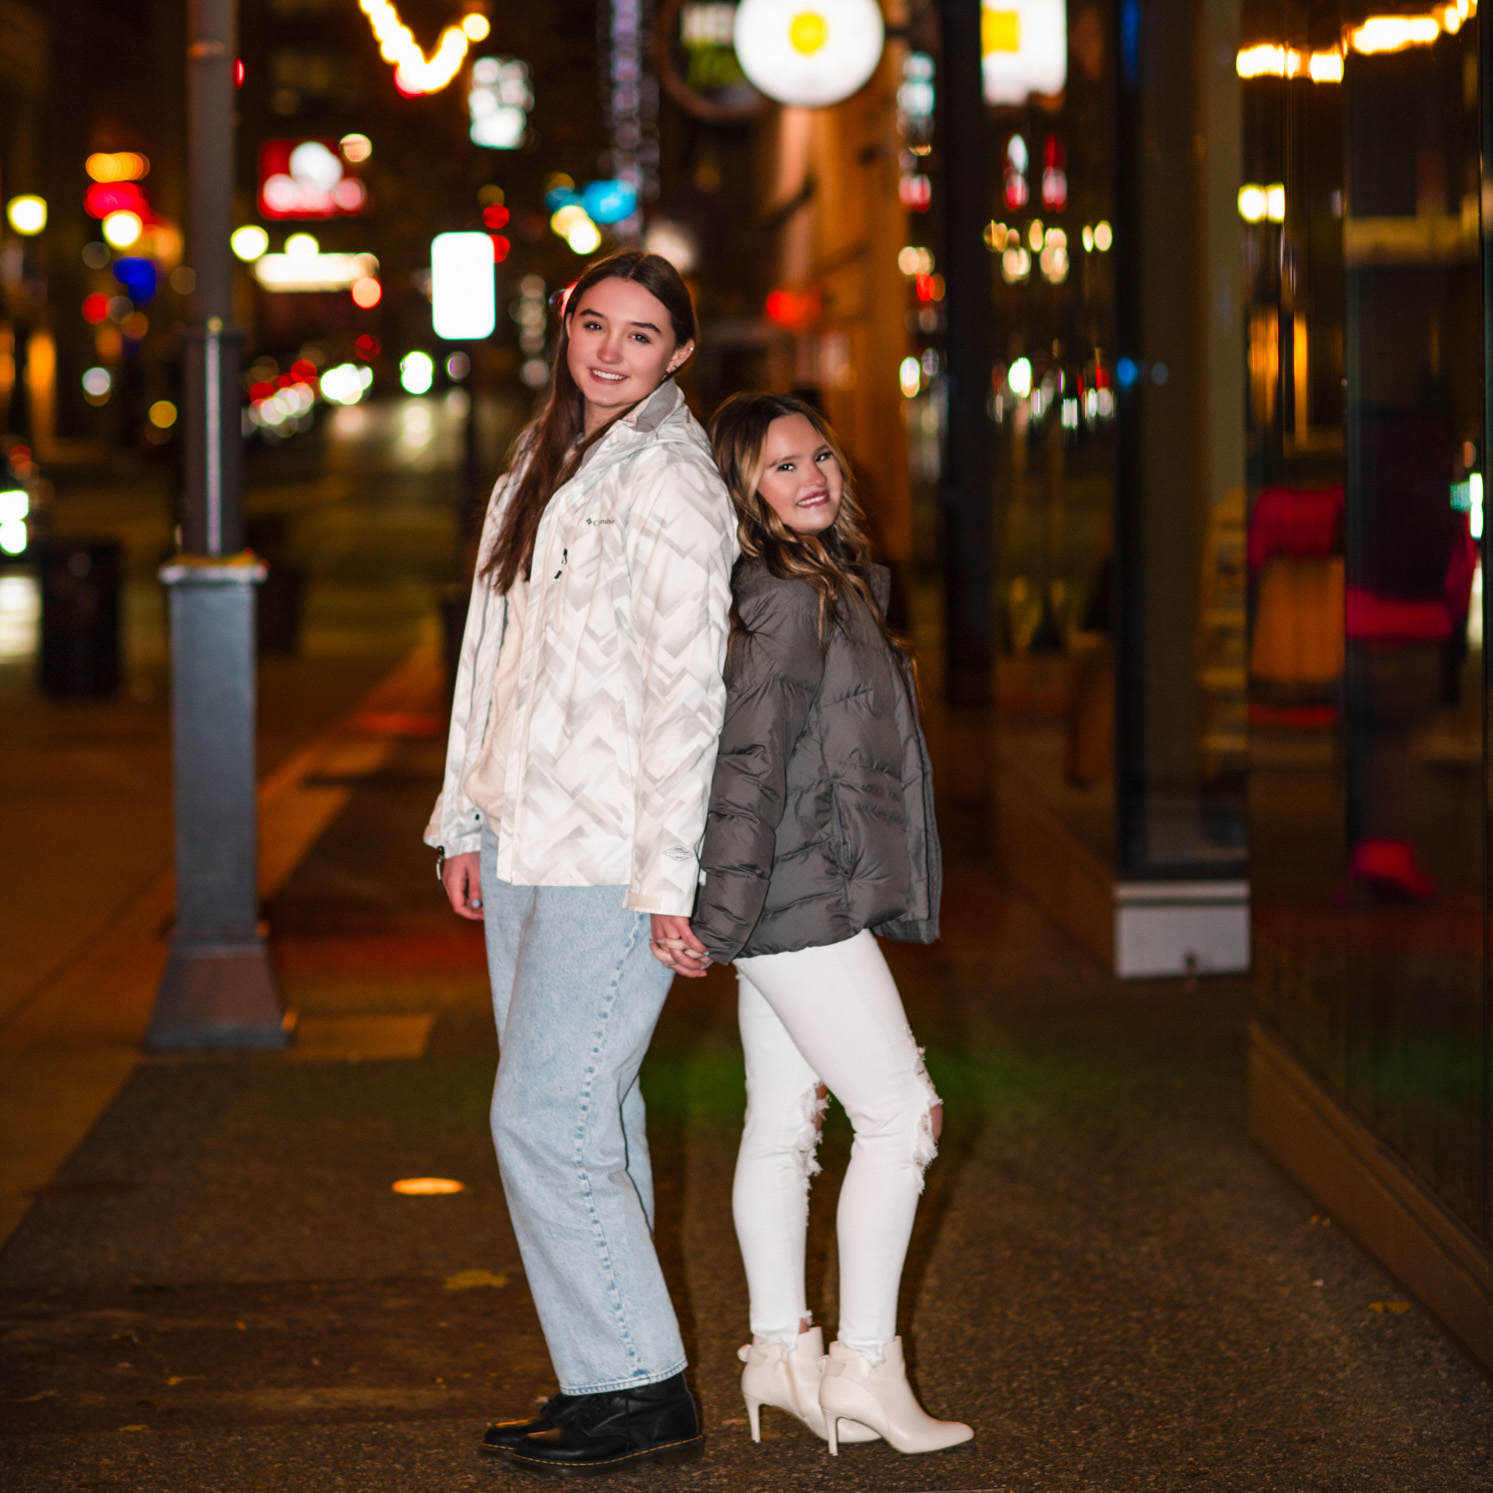 Night Photos of two teen girls on a lighted street in downtown Pittsburgh.